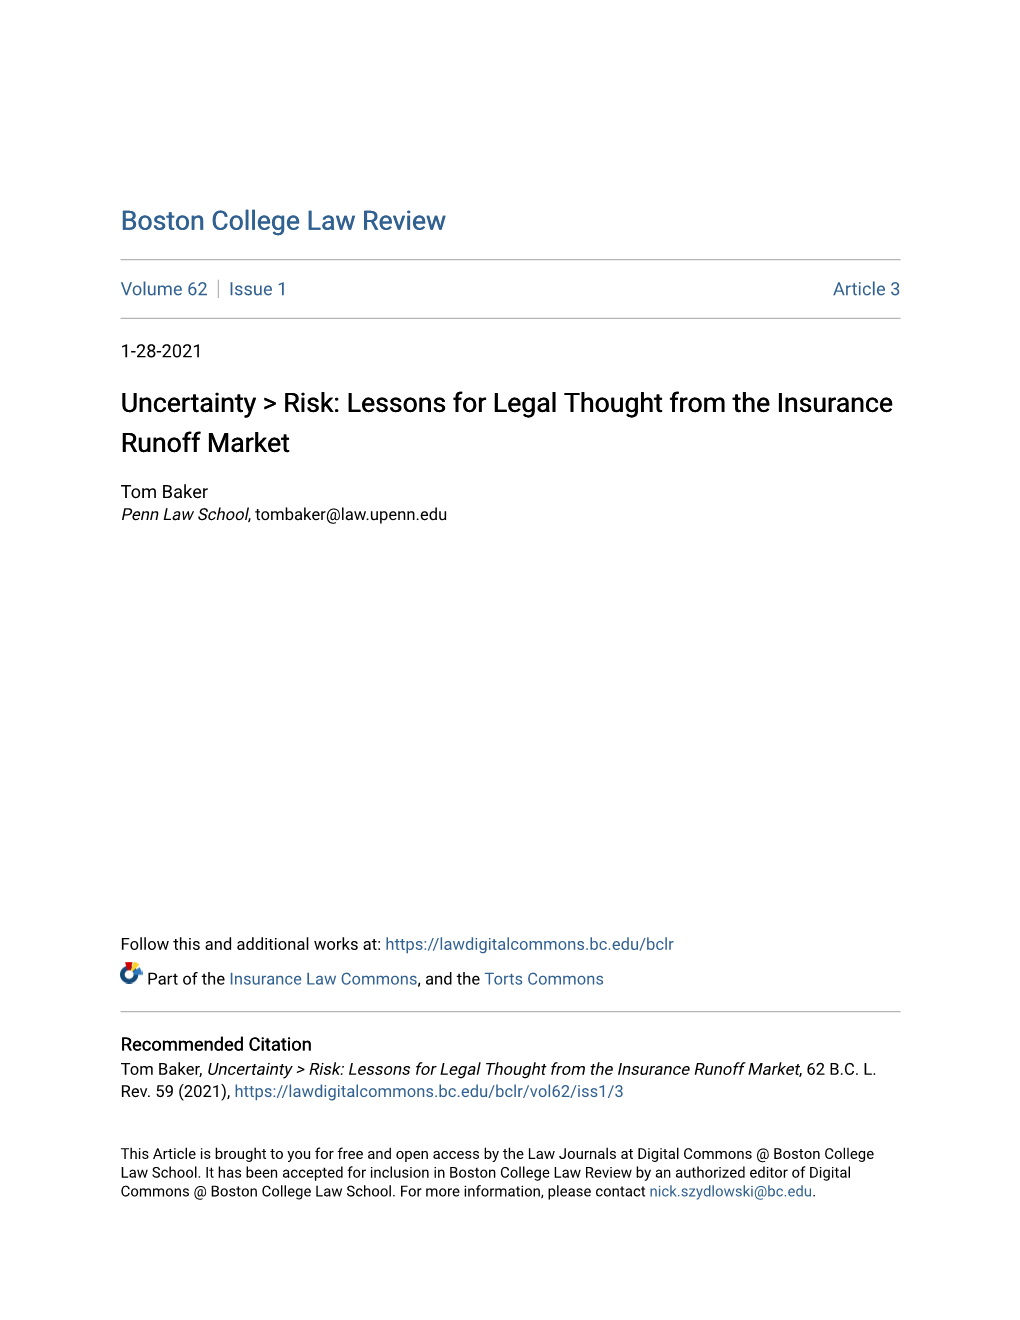 Lessons for Legal Thought from the Insurance Runoff Market